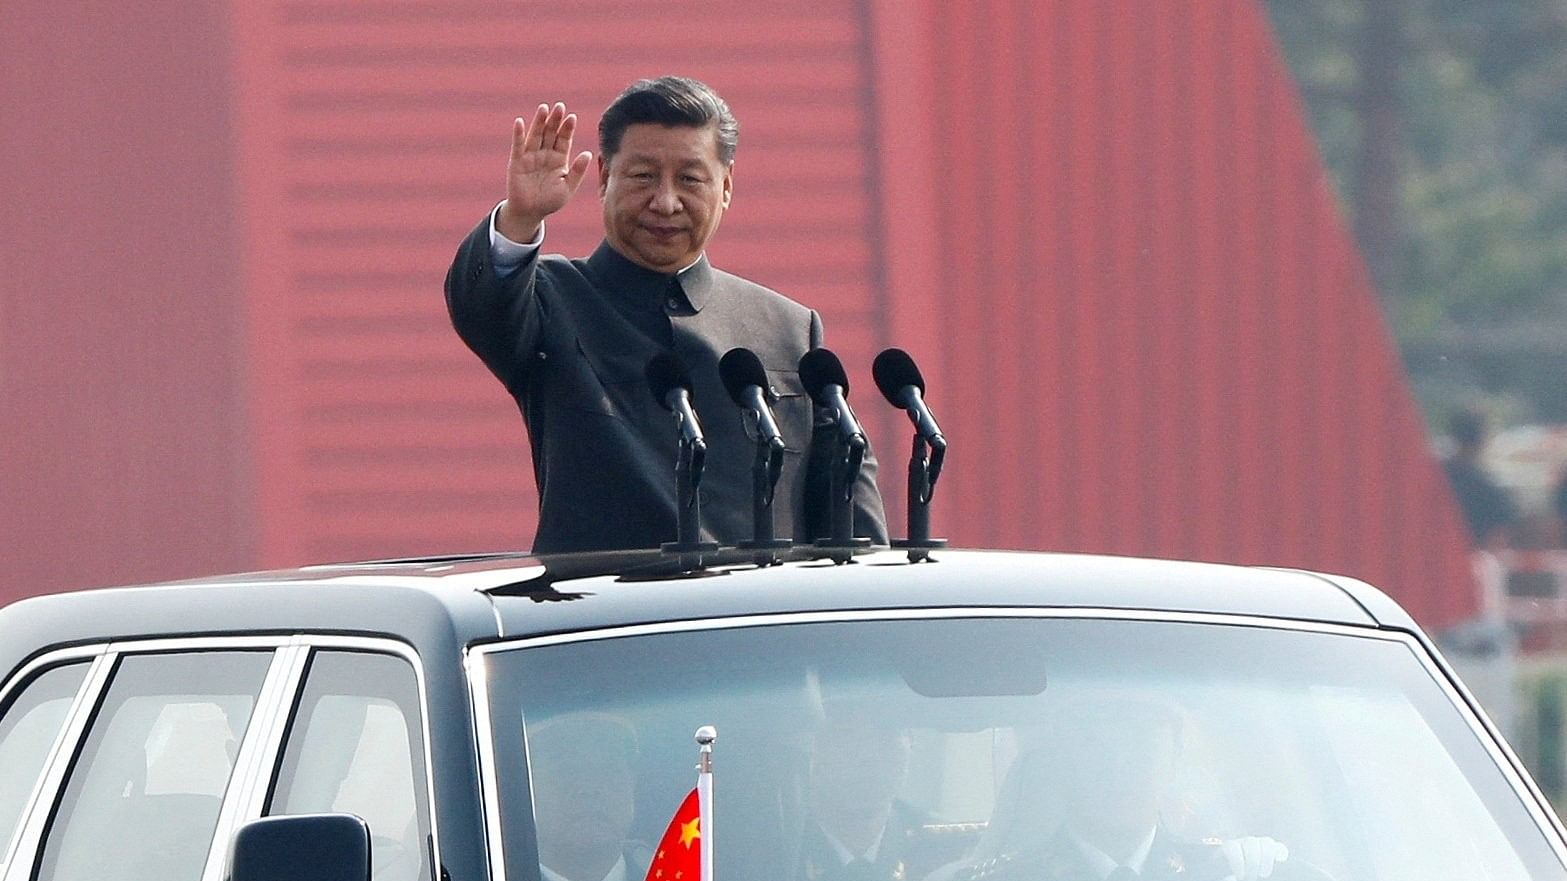 <div class="paragraphs"><p>FILE PHOTO: Chinese President Xi Jinping waves from a vehicle as he reviews the troops at a military parade marking the 70th founding anniversary of People's Republic of China, China October 1, 2019. </p></div>